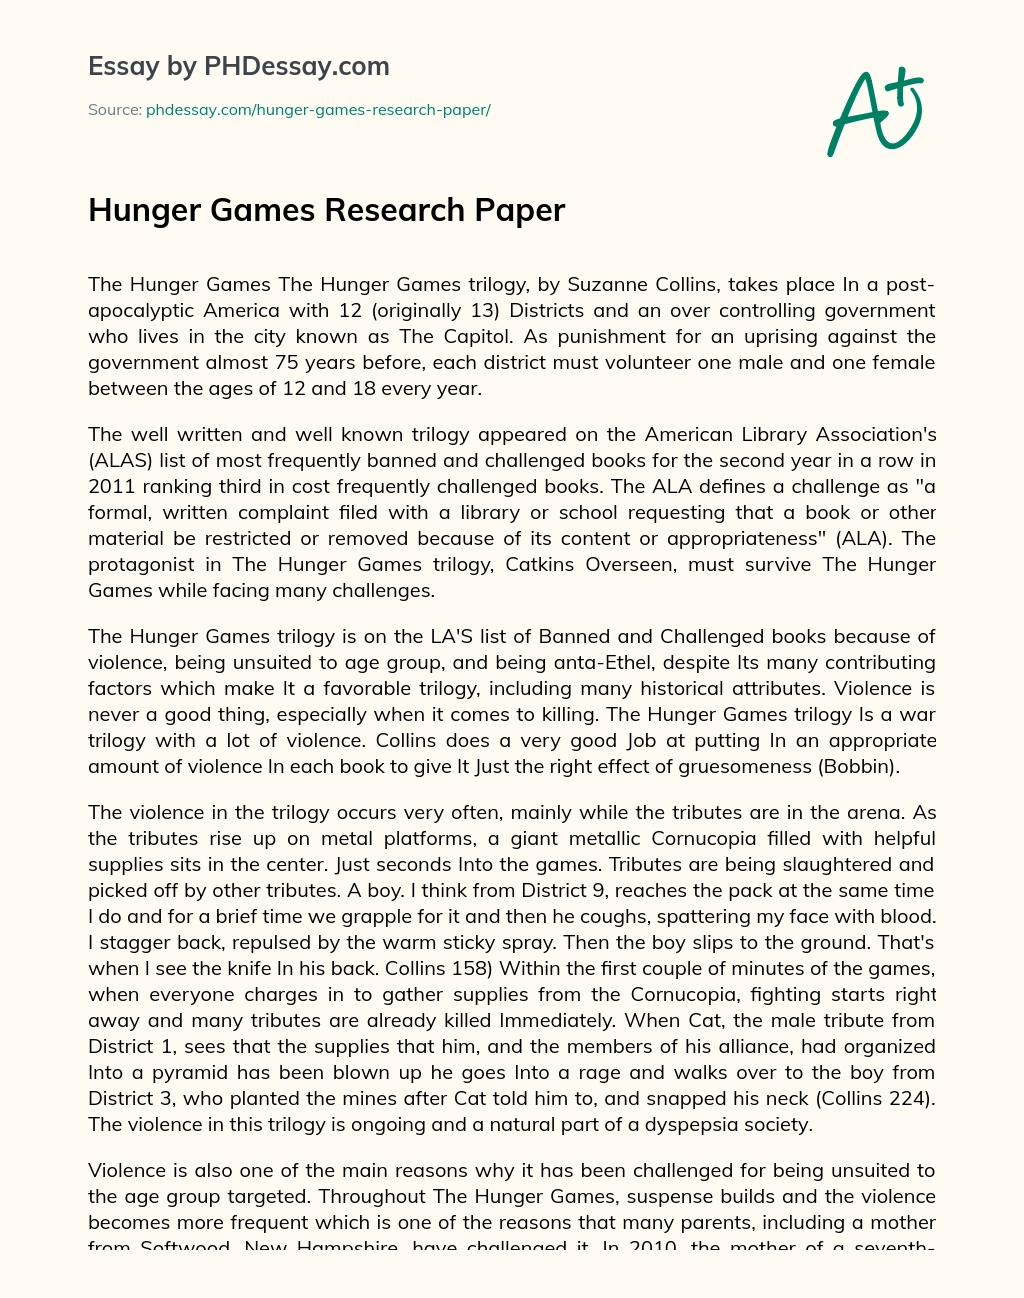 Hunger Games Research Paper essay